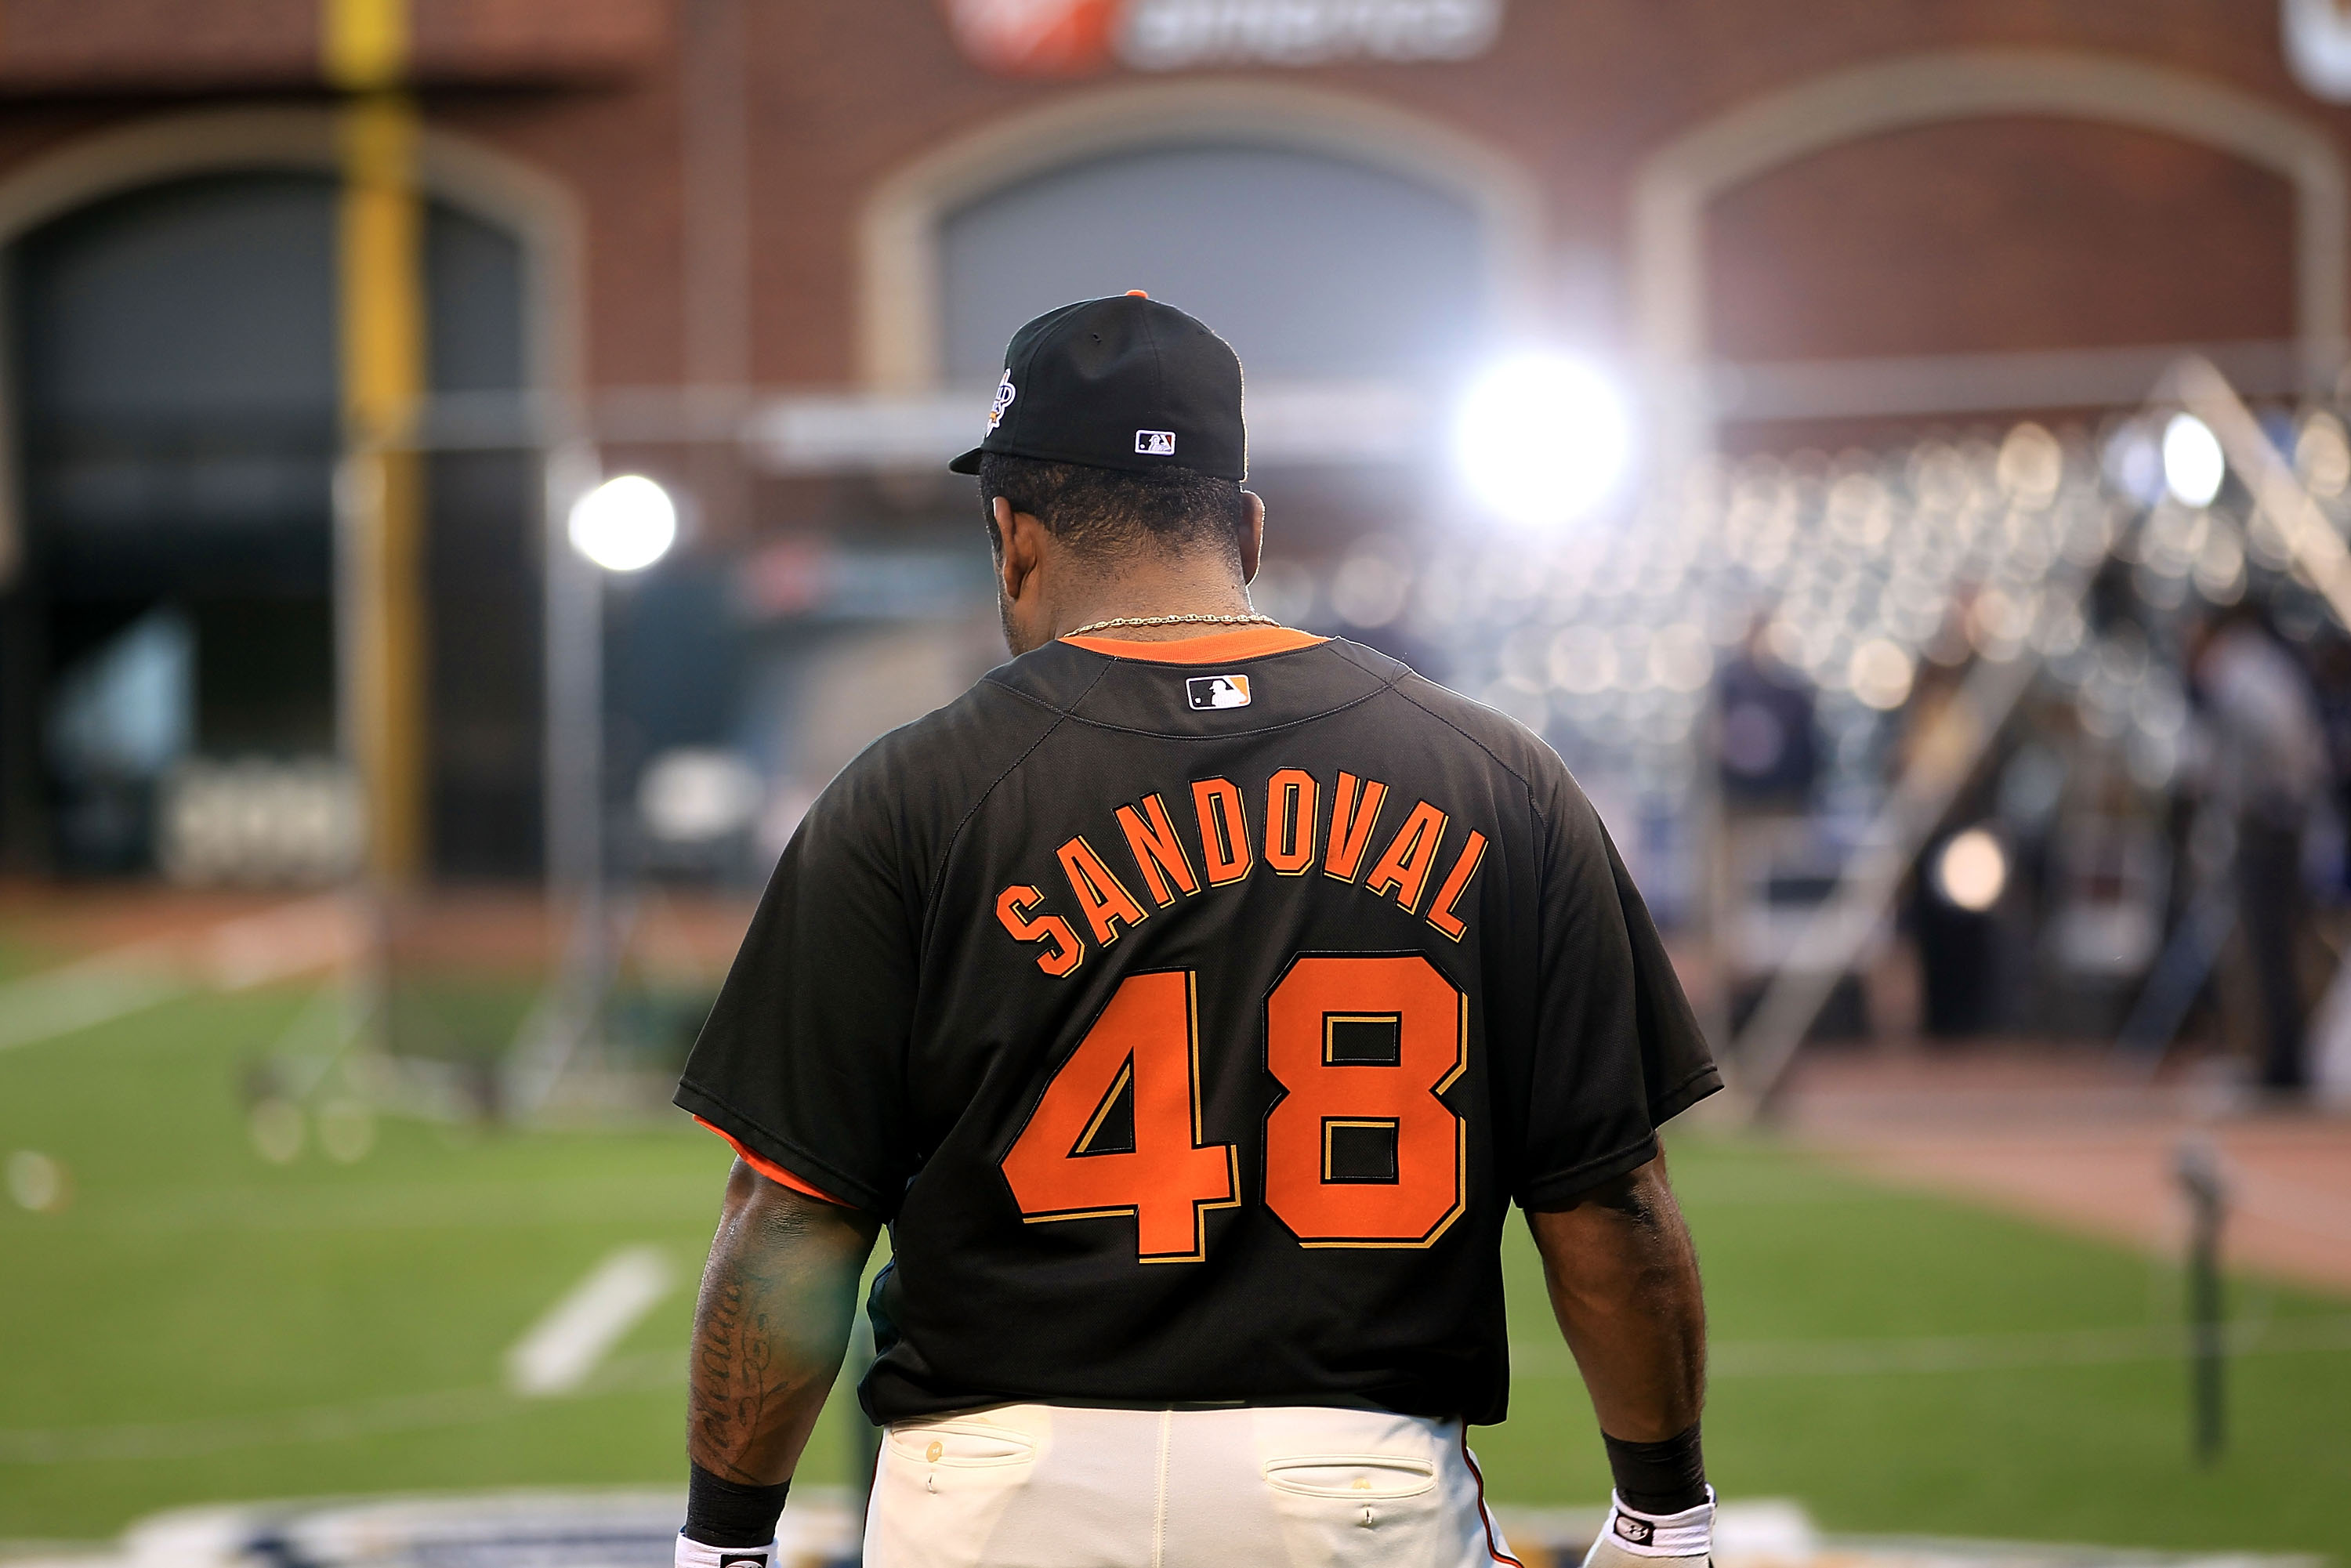 San Francisco Giants - 2018 Black Alternate Gigantes Team-Issued and Autographed  Jersey - Pablo Sandoval (size 48)